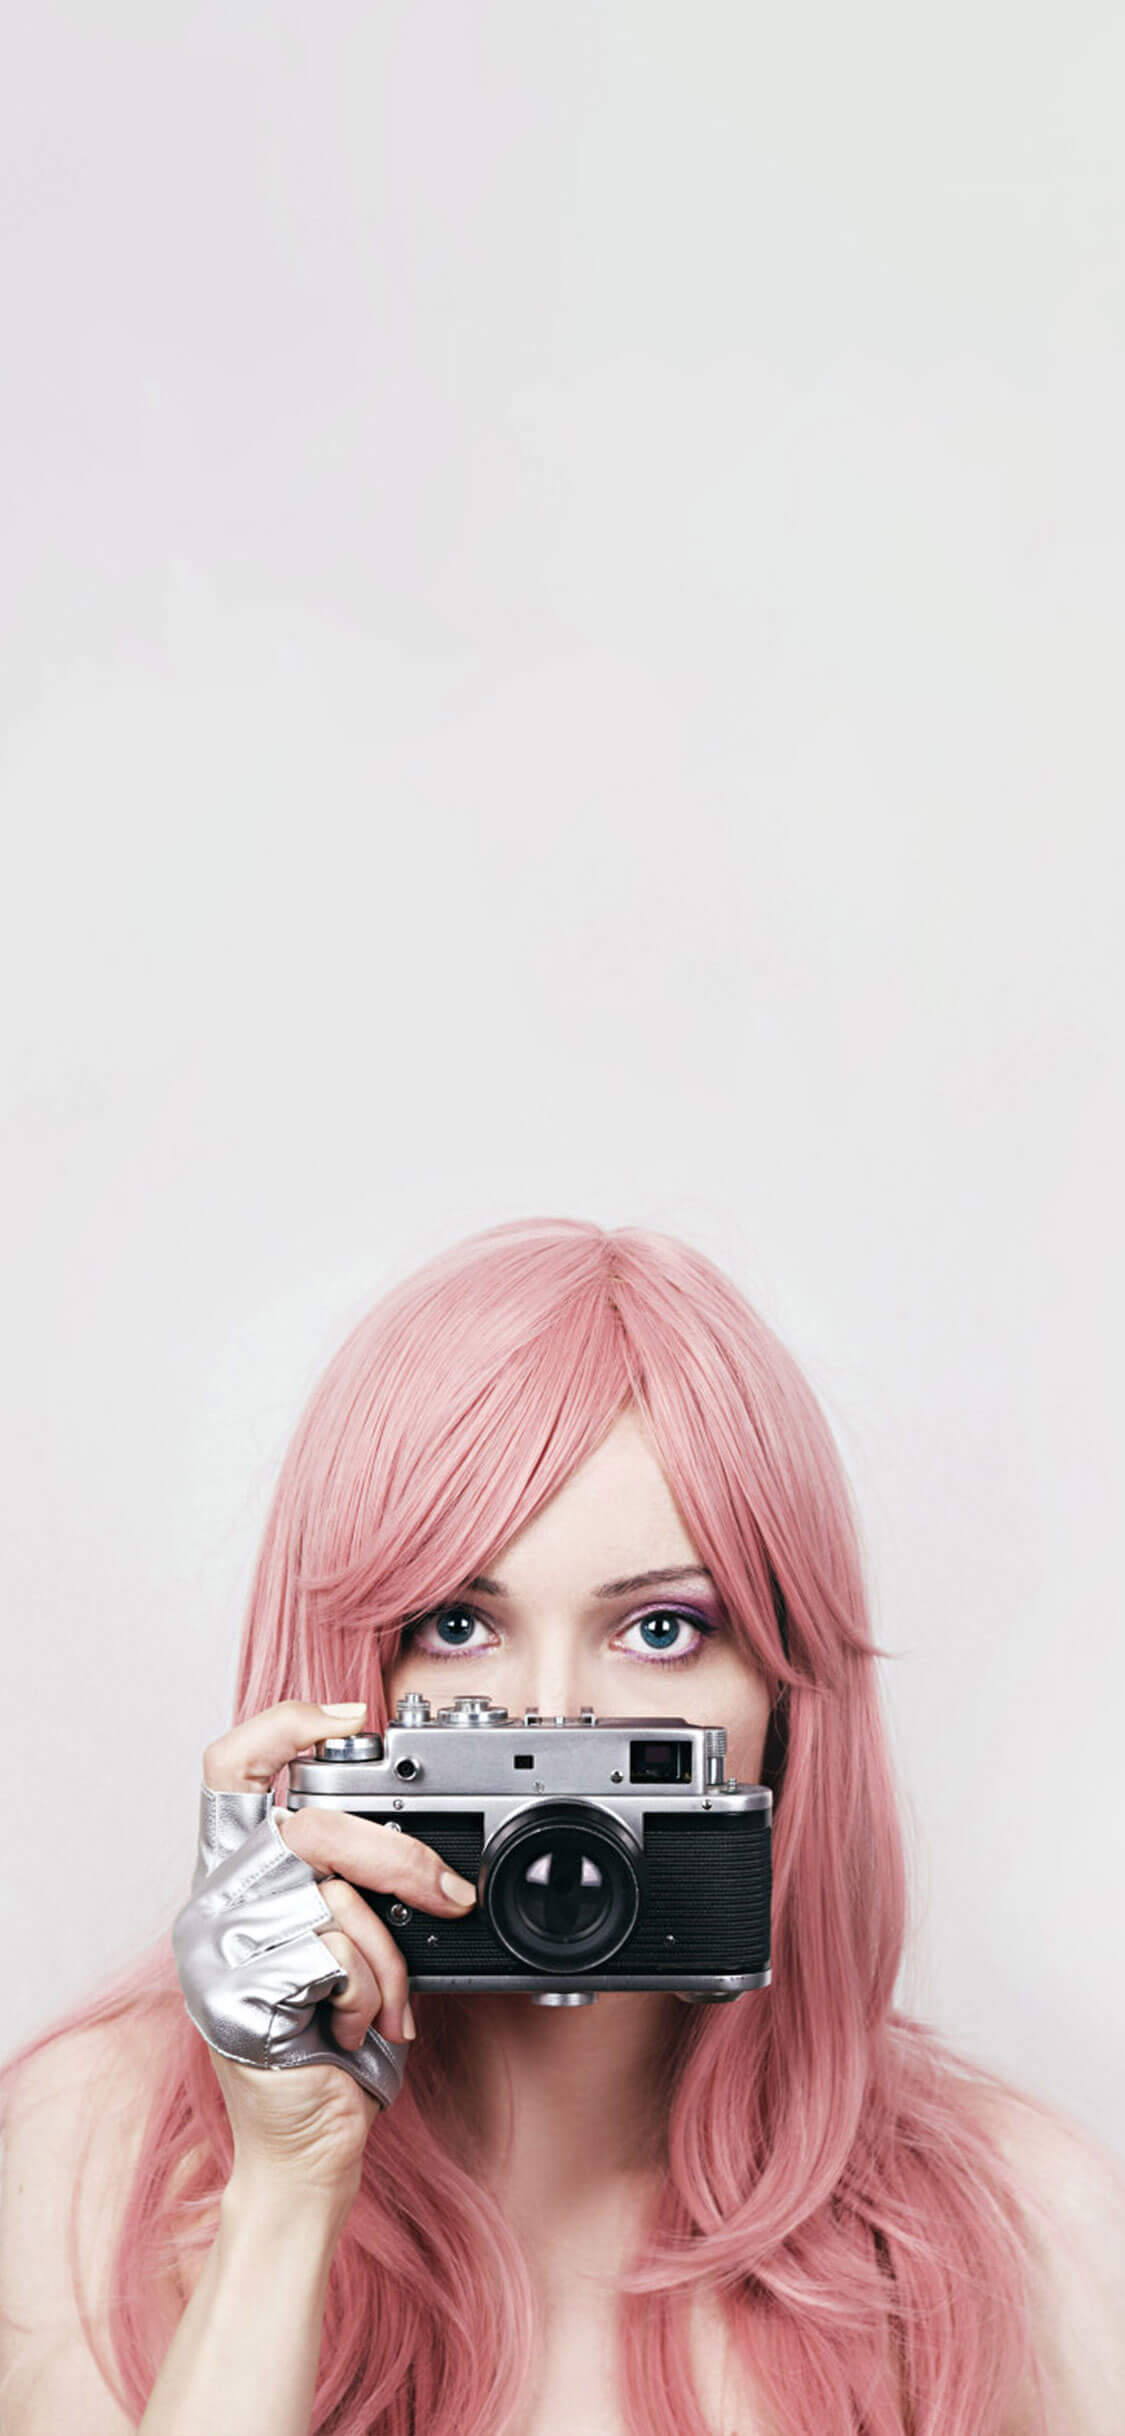 Cute Girl For Iphone Wallpapers Wallpapers